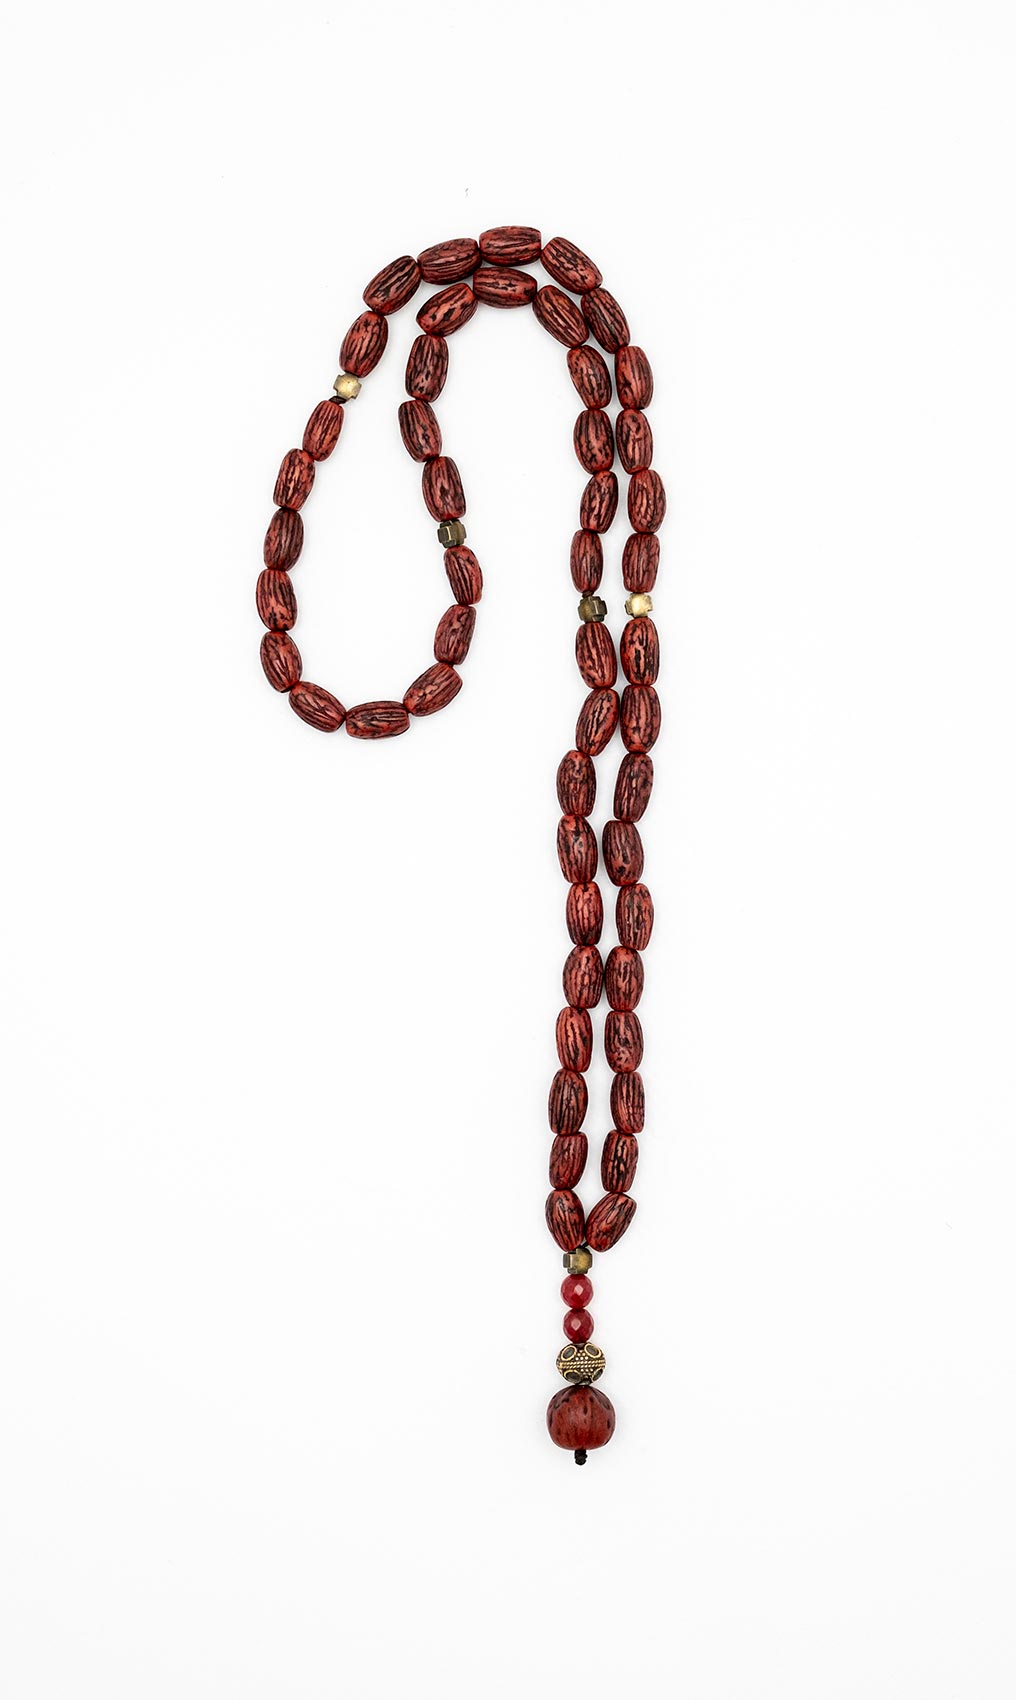 Catholic Prayer beads (Rosary) made of processed olive seeds, tin, amber and juniper seed